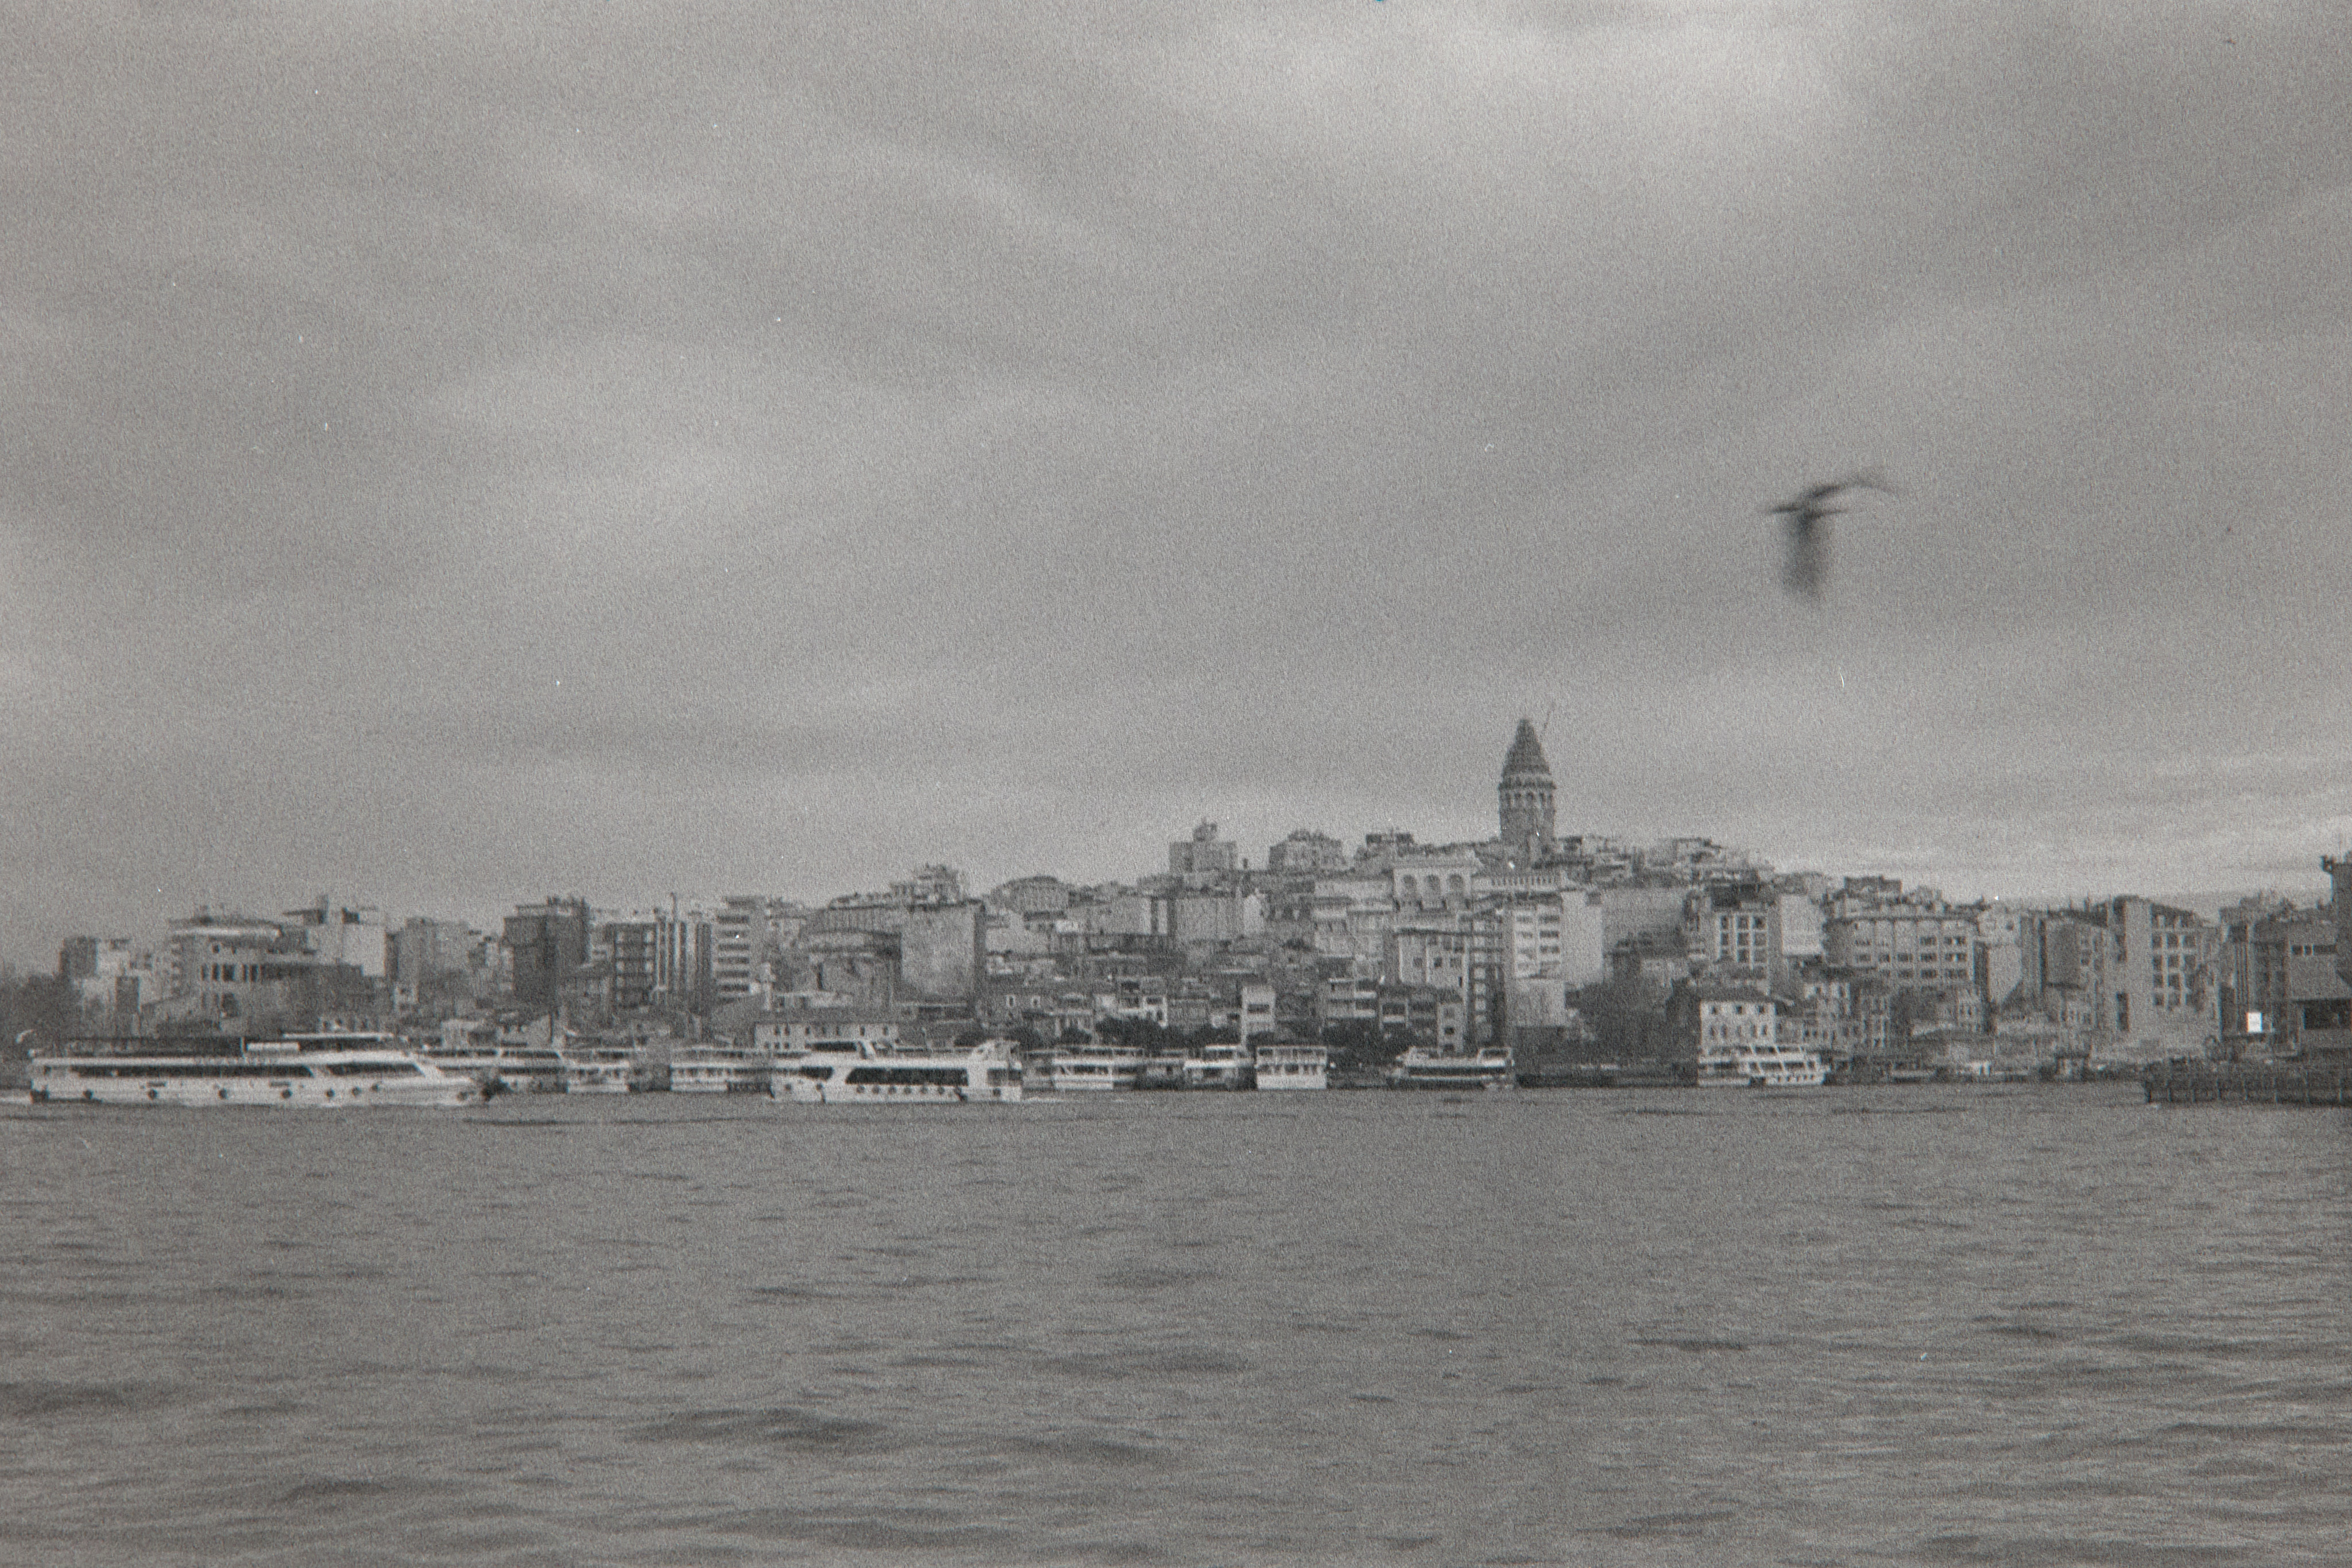 Looking across the Golden Horn at Galata Tower and such